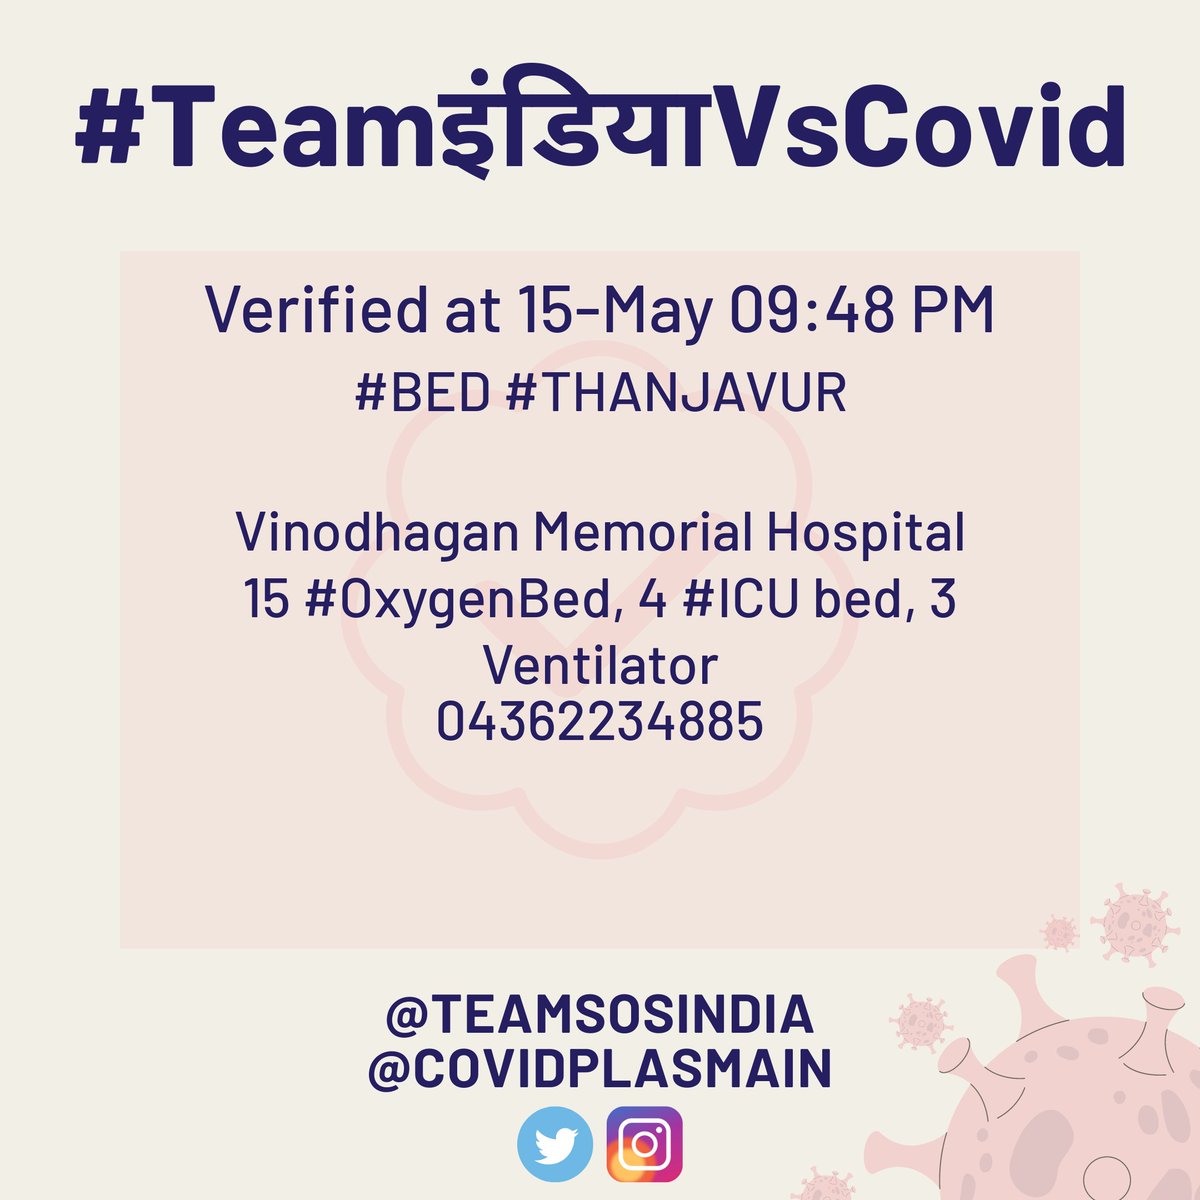 #Thanjavur #bed

#Verified @ 15-May 09:48 PM ✅

Vinodhagan Memorial Hospital
15 #OxygenBed, 4 #ICU bed, 3 Ventilator
04362234885

#Covid19IndiaHelp